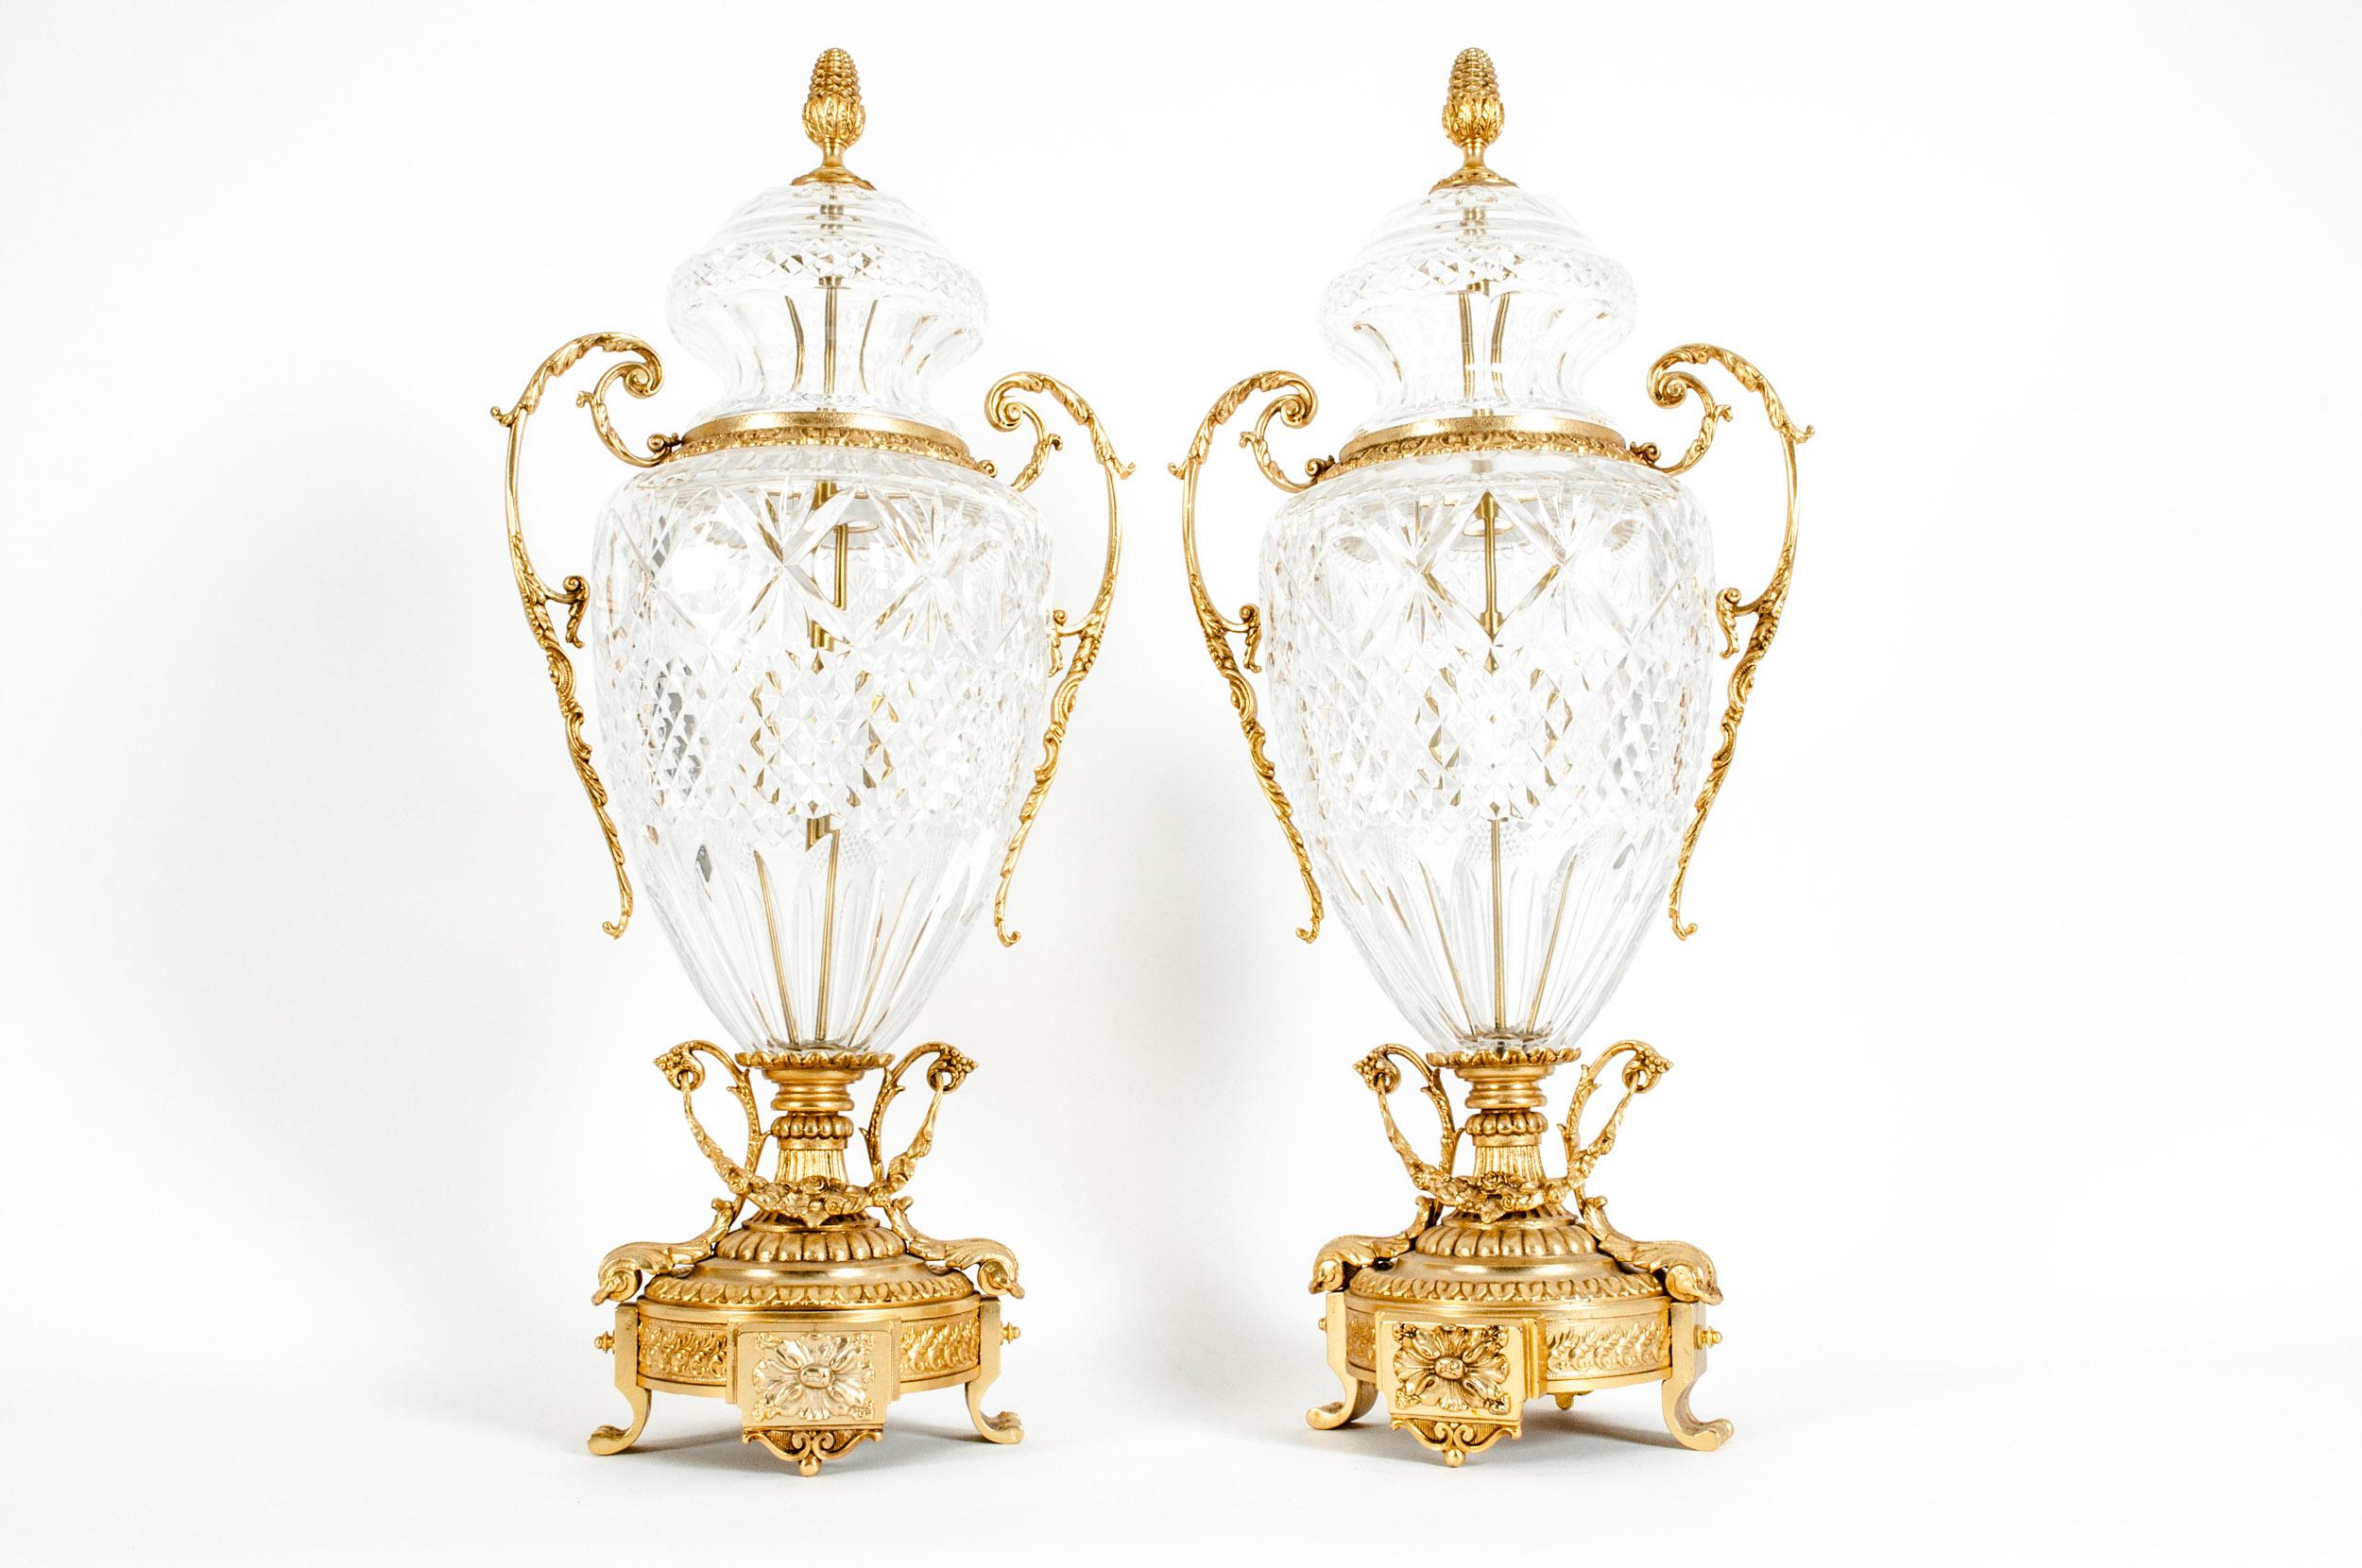 Impressive pair of footed gilt bronze-mounted diamond shape cut crystal decorative urns / centerpiece. Each urn is mounted on a squared base, flanked by two scroll gilt handles with exterior design details , finished with an acorn finial all the way